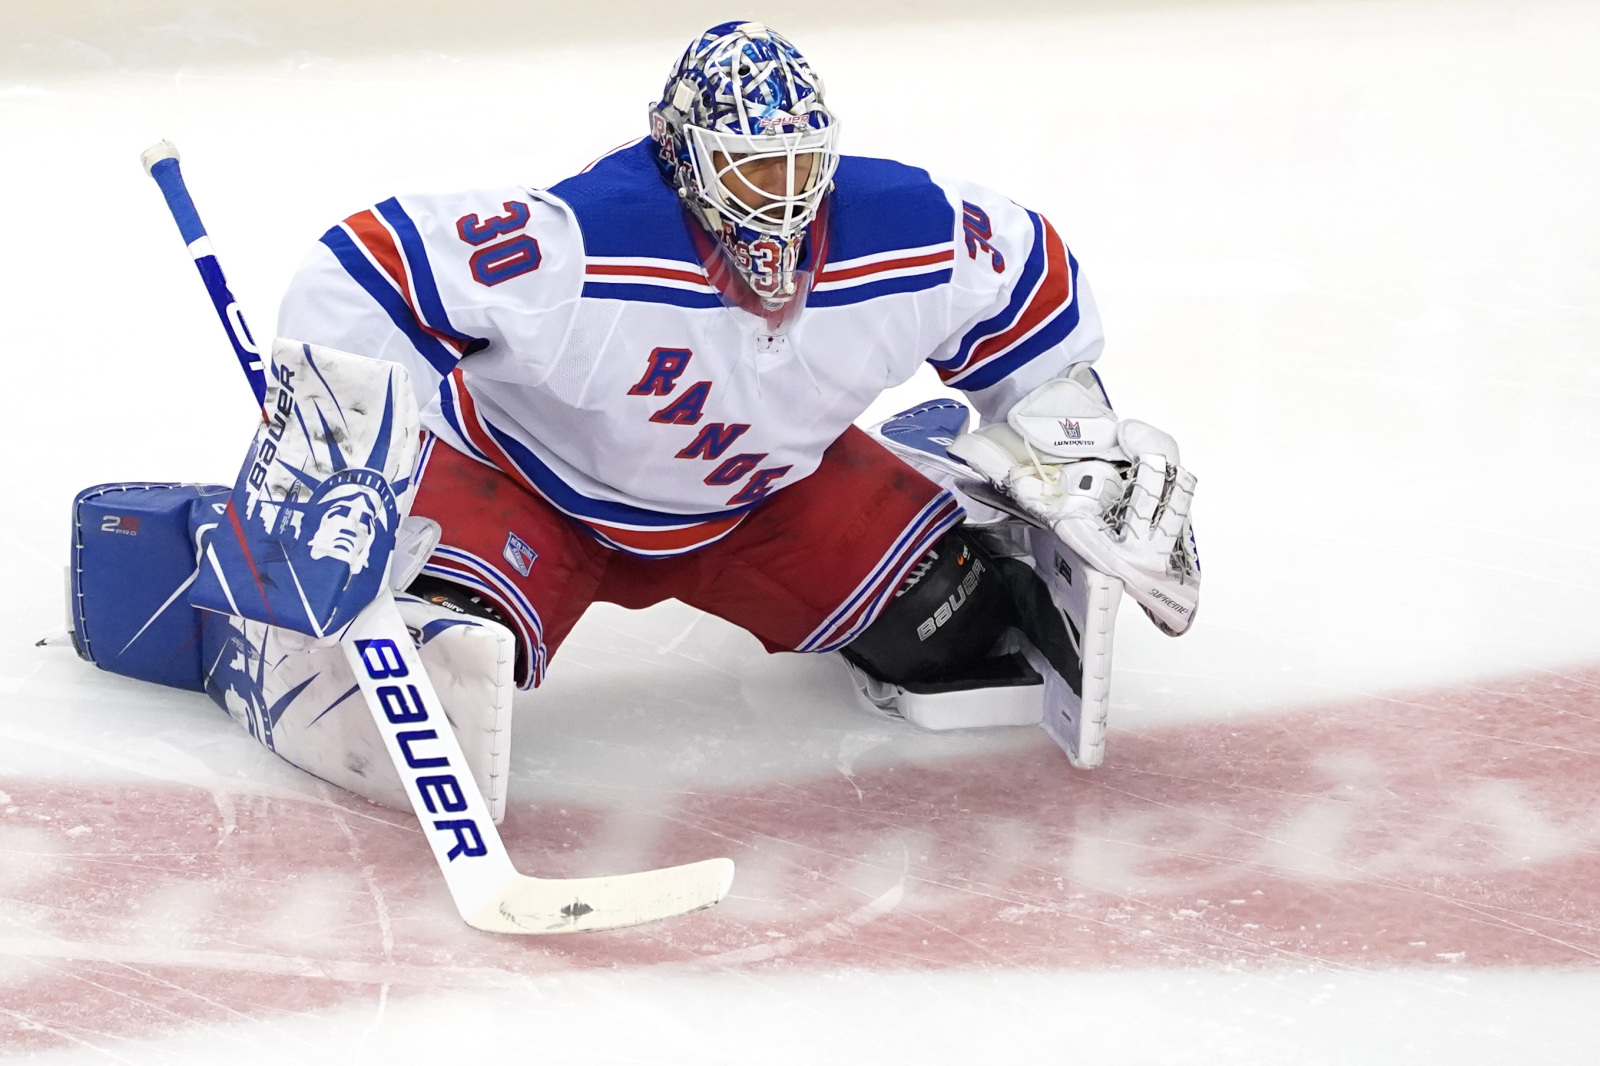 BCBS For 8/21: Henrik Lundqvist Makes It Official; Announces Retirement, Lundqvist's  Rangers Legacy, Hall of Fame Bid, Future and Place in NYR History; NYR To  Retire #30 Next Season, Lundqvist vs Giacomin